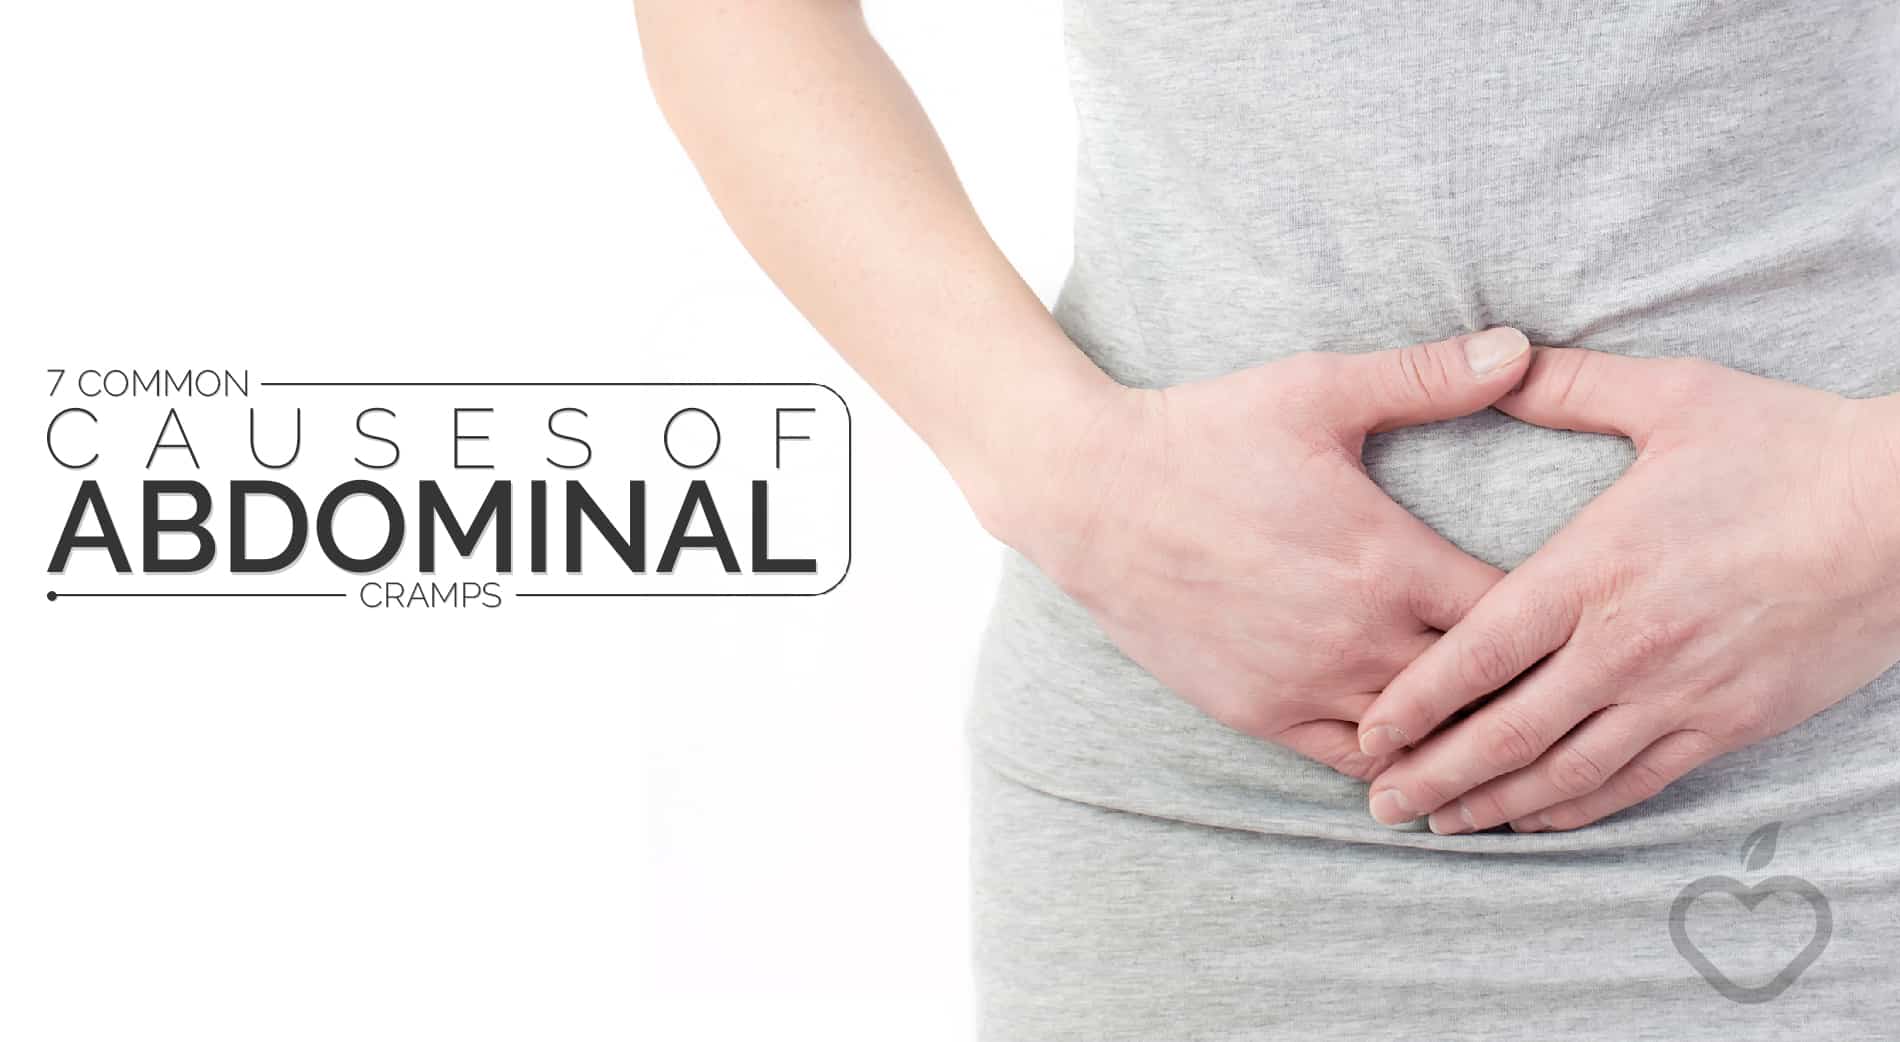 7 Common Causes Of Abdominal Cramps